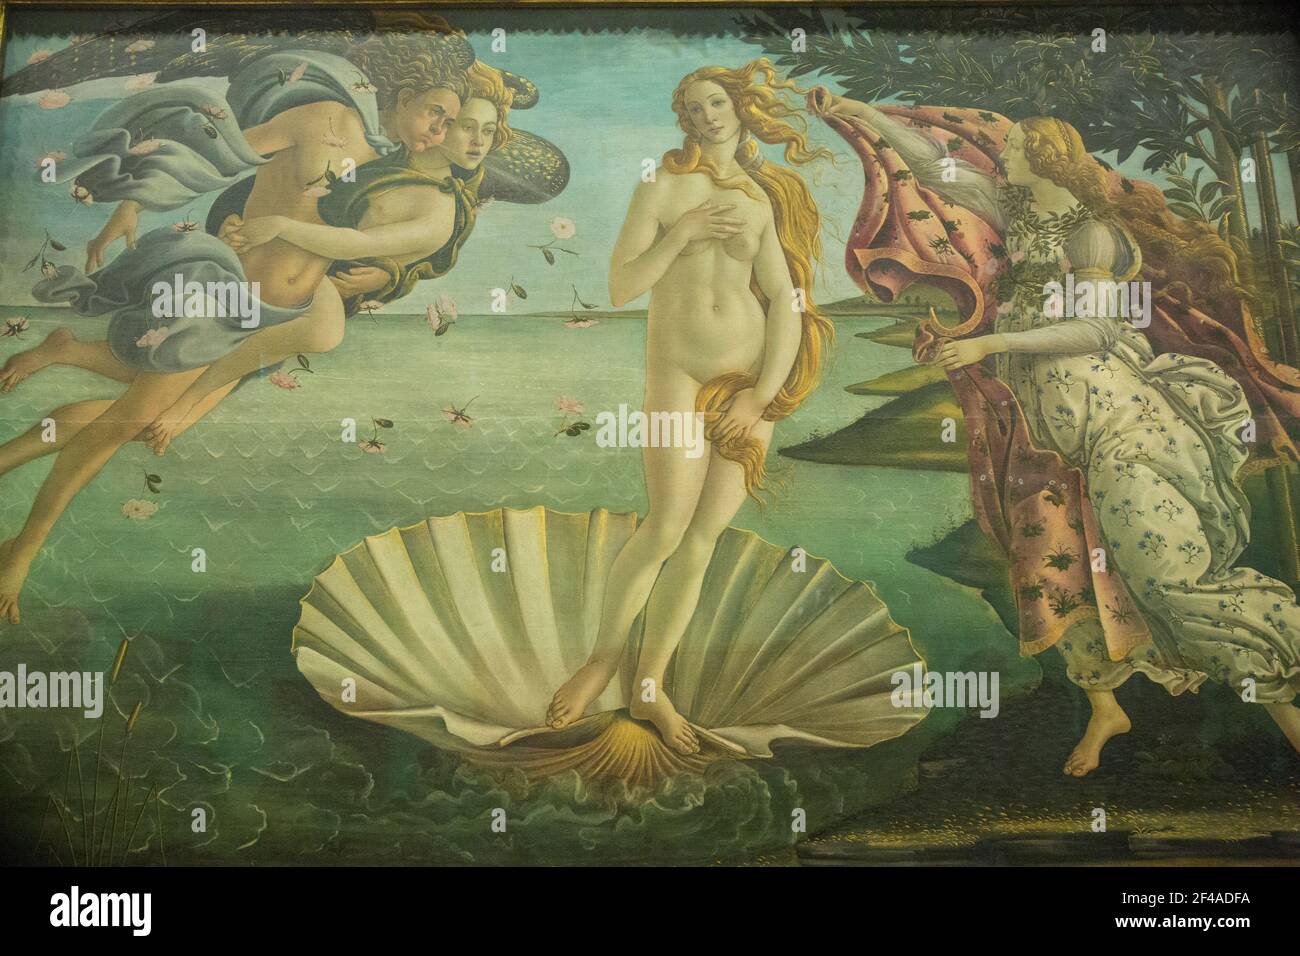 Florence, Italy.  Birth of Venus by Sandro Botticelli tempera on canvas painting in the Uffizi Gallery.  (For Editorial Use Only) Stock Photo